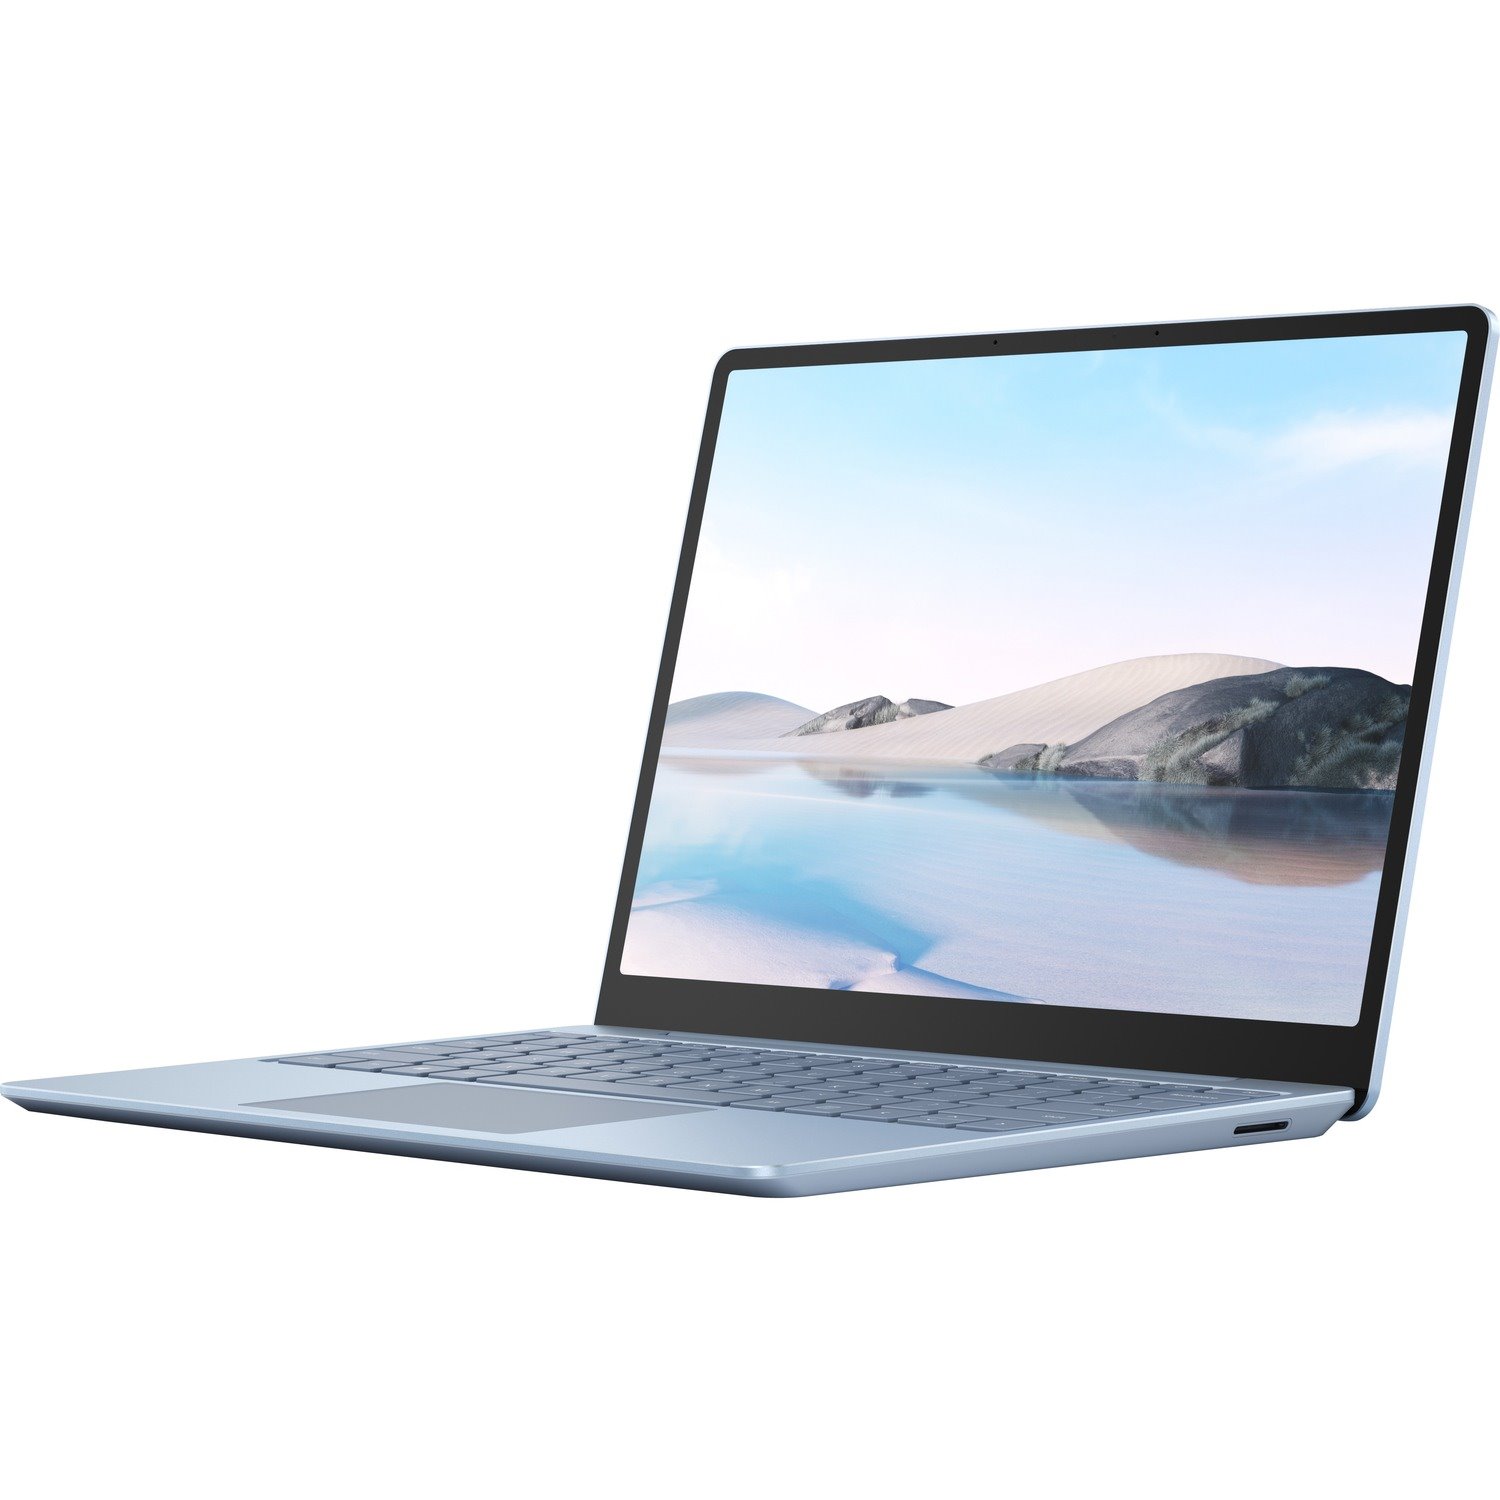 Microsoft Surface Laptop Go 31.5 cm (12.4") Touchscreen Notebook - 1536 x 1024 - Intel Core i5 10th Gen i5-1035G1 1 GHz - 8 GB Total RAM - 128 GB SSD - Ice Blue